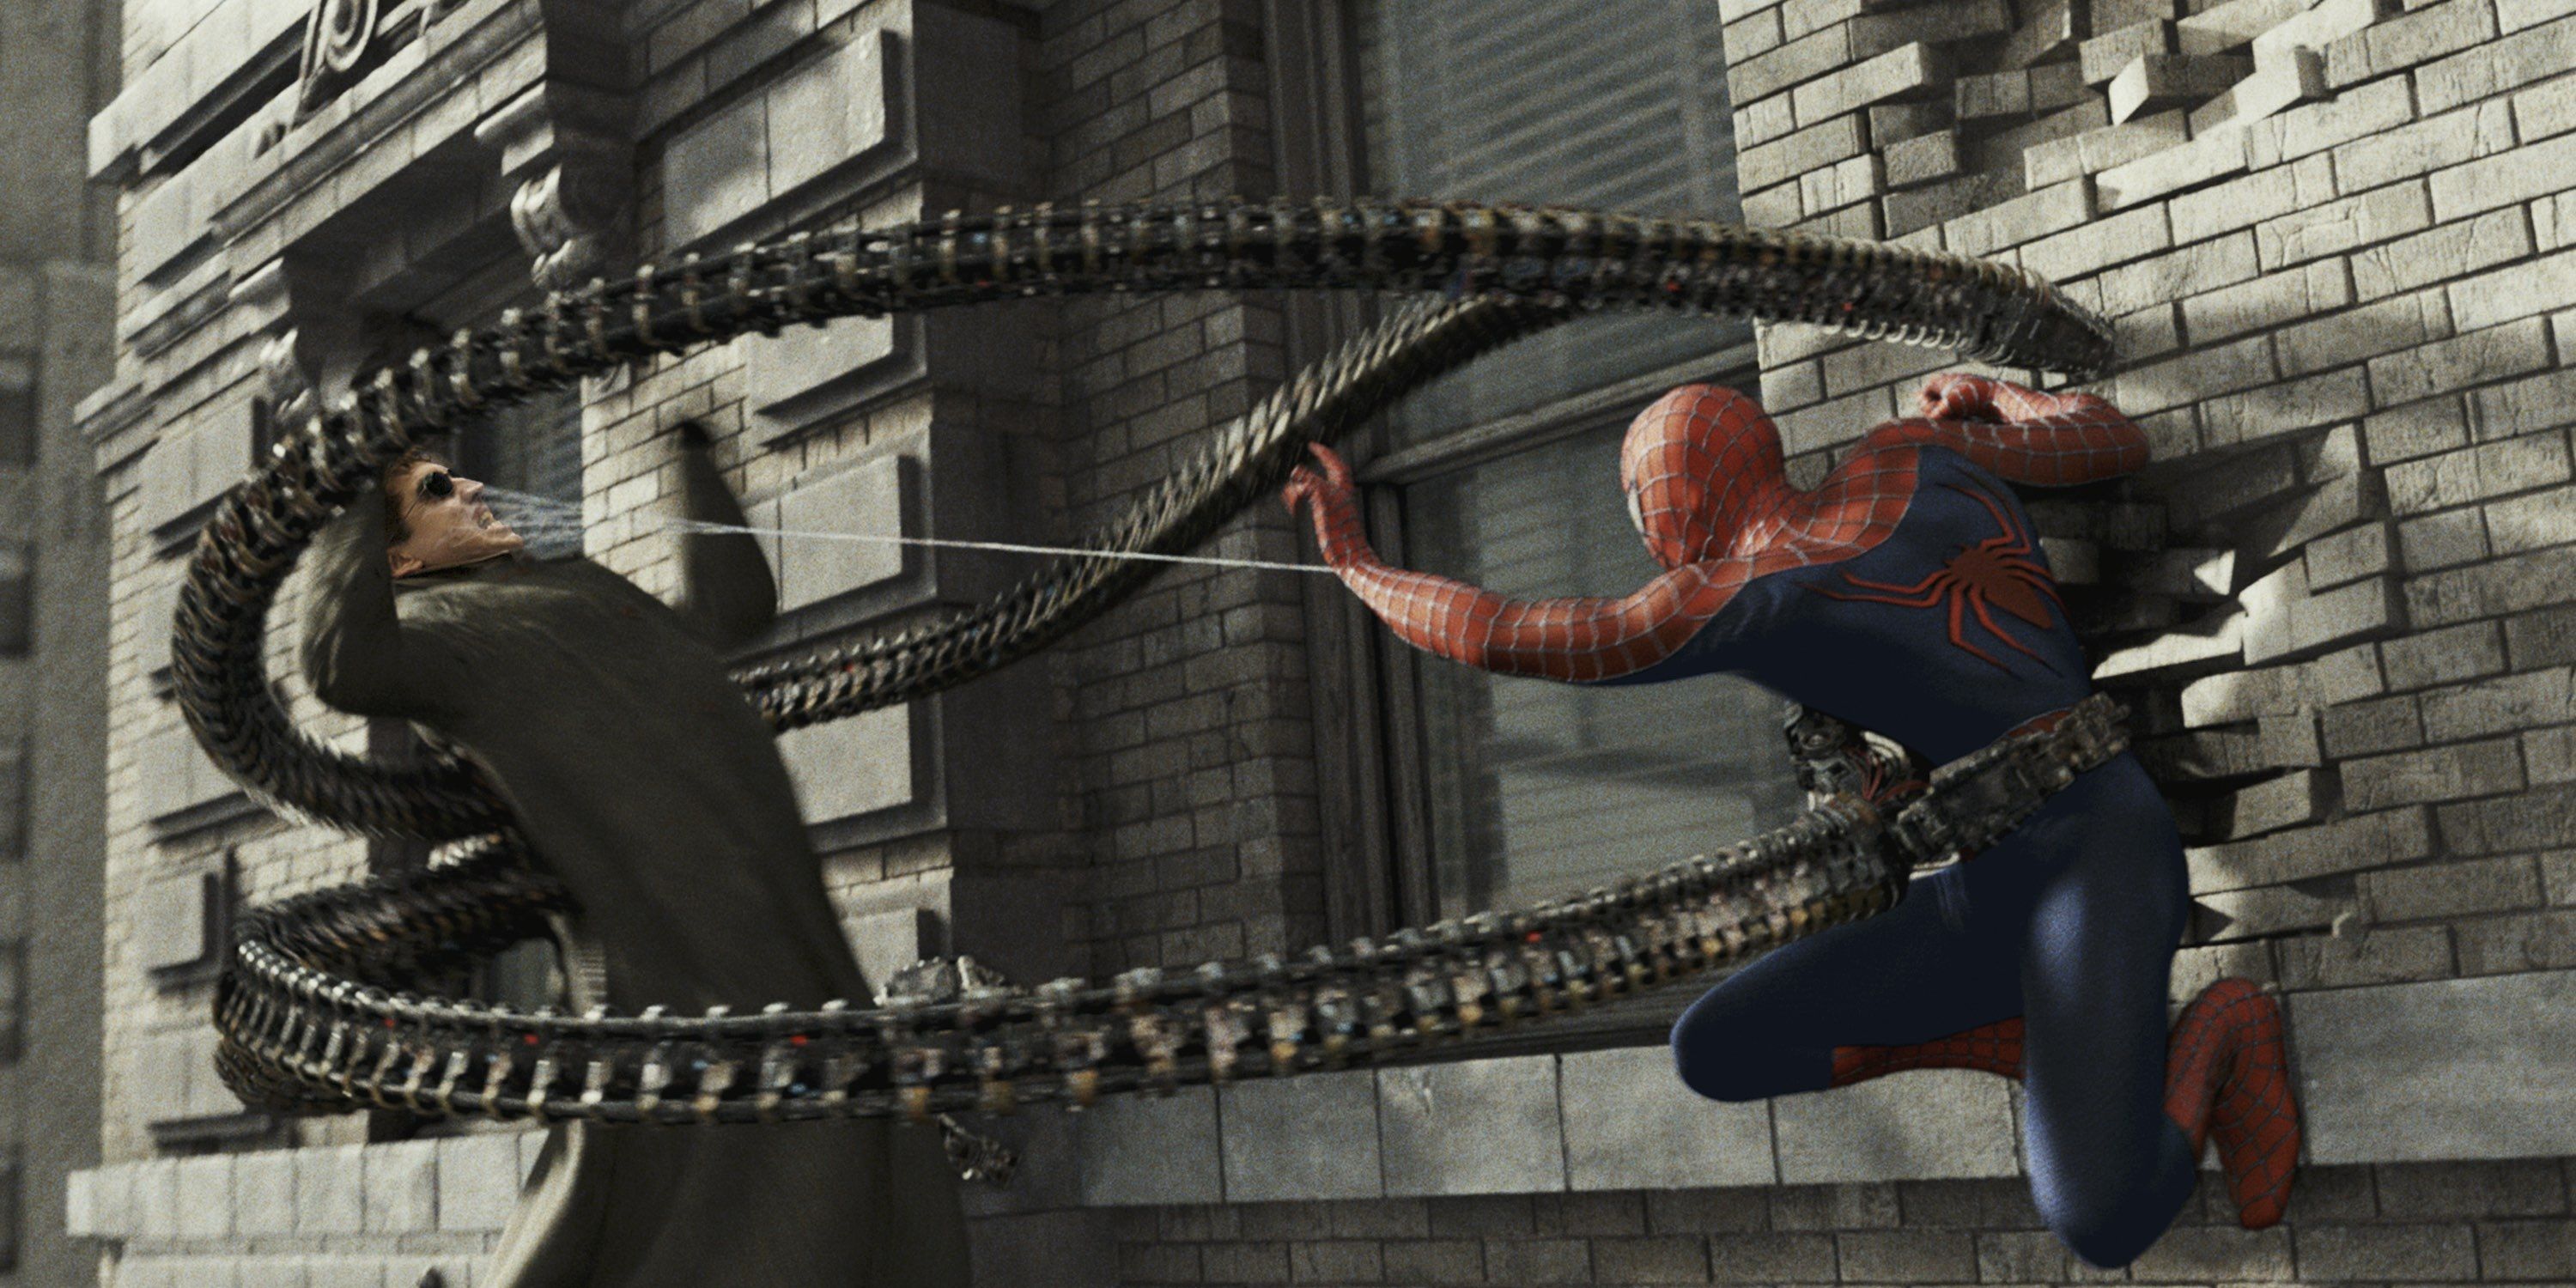 Spider-Man shooting a web at Doc Ock in spiderman 2